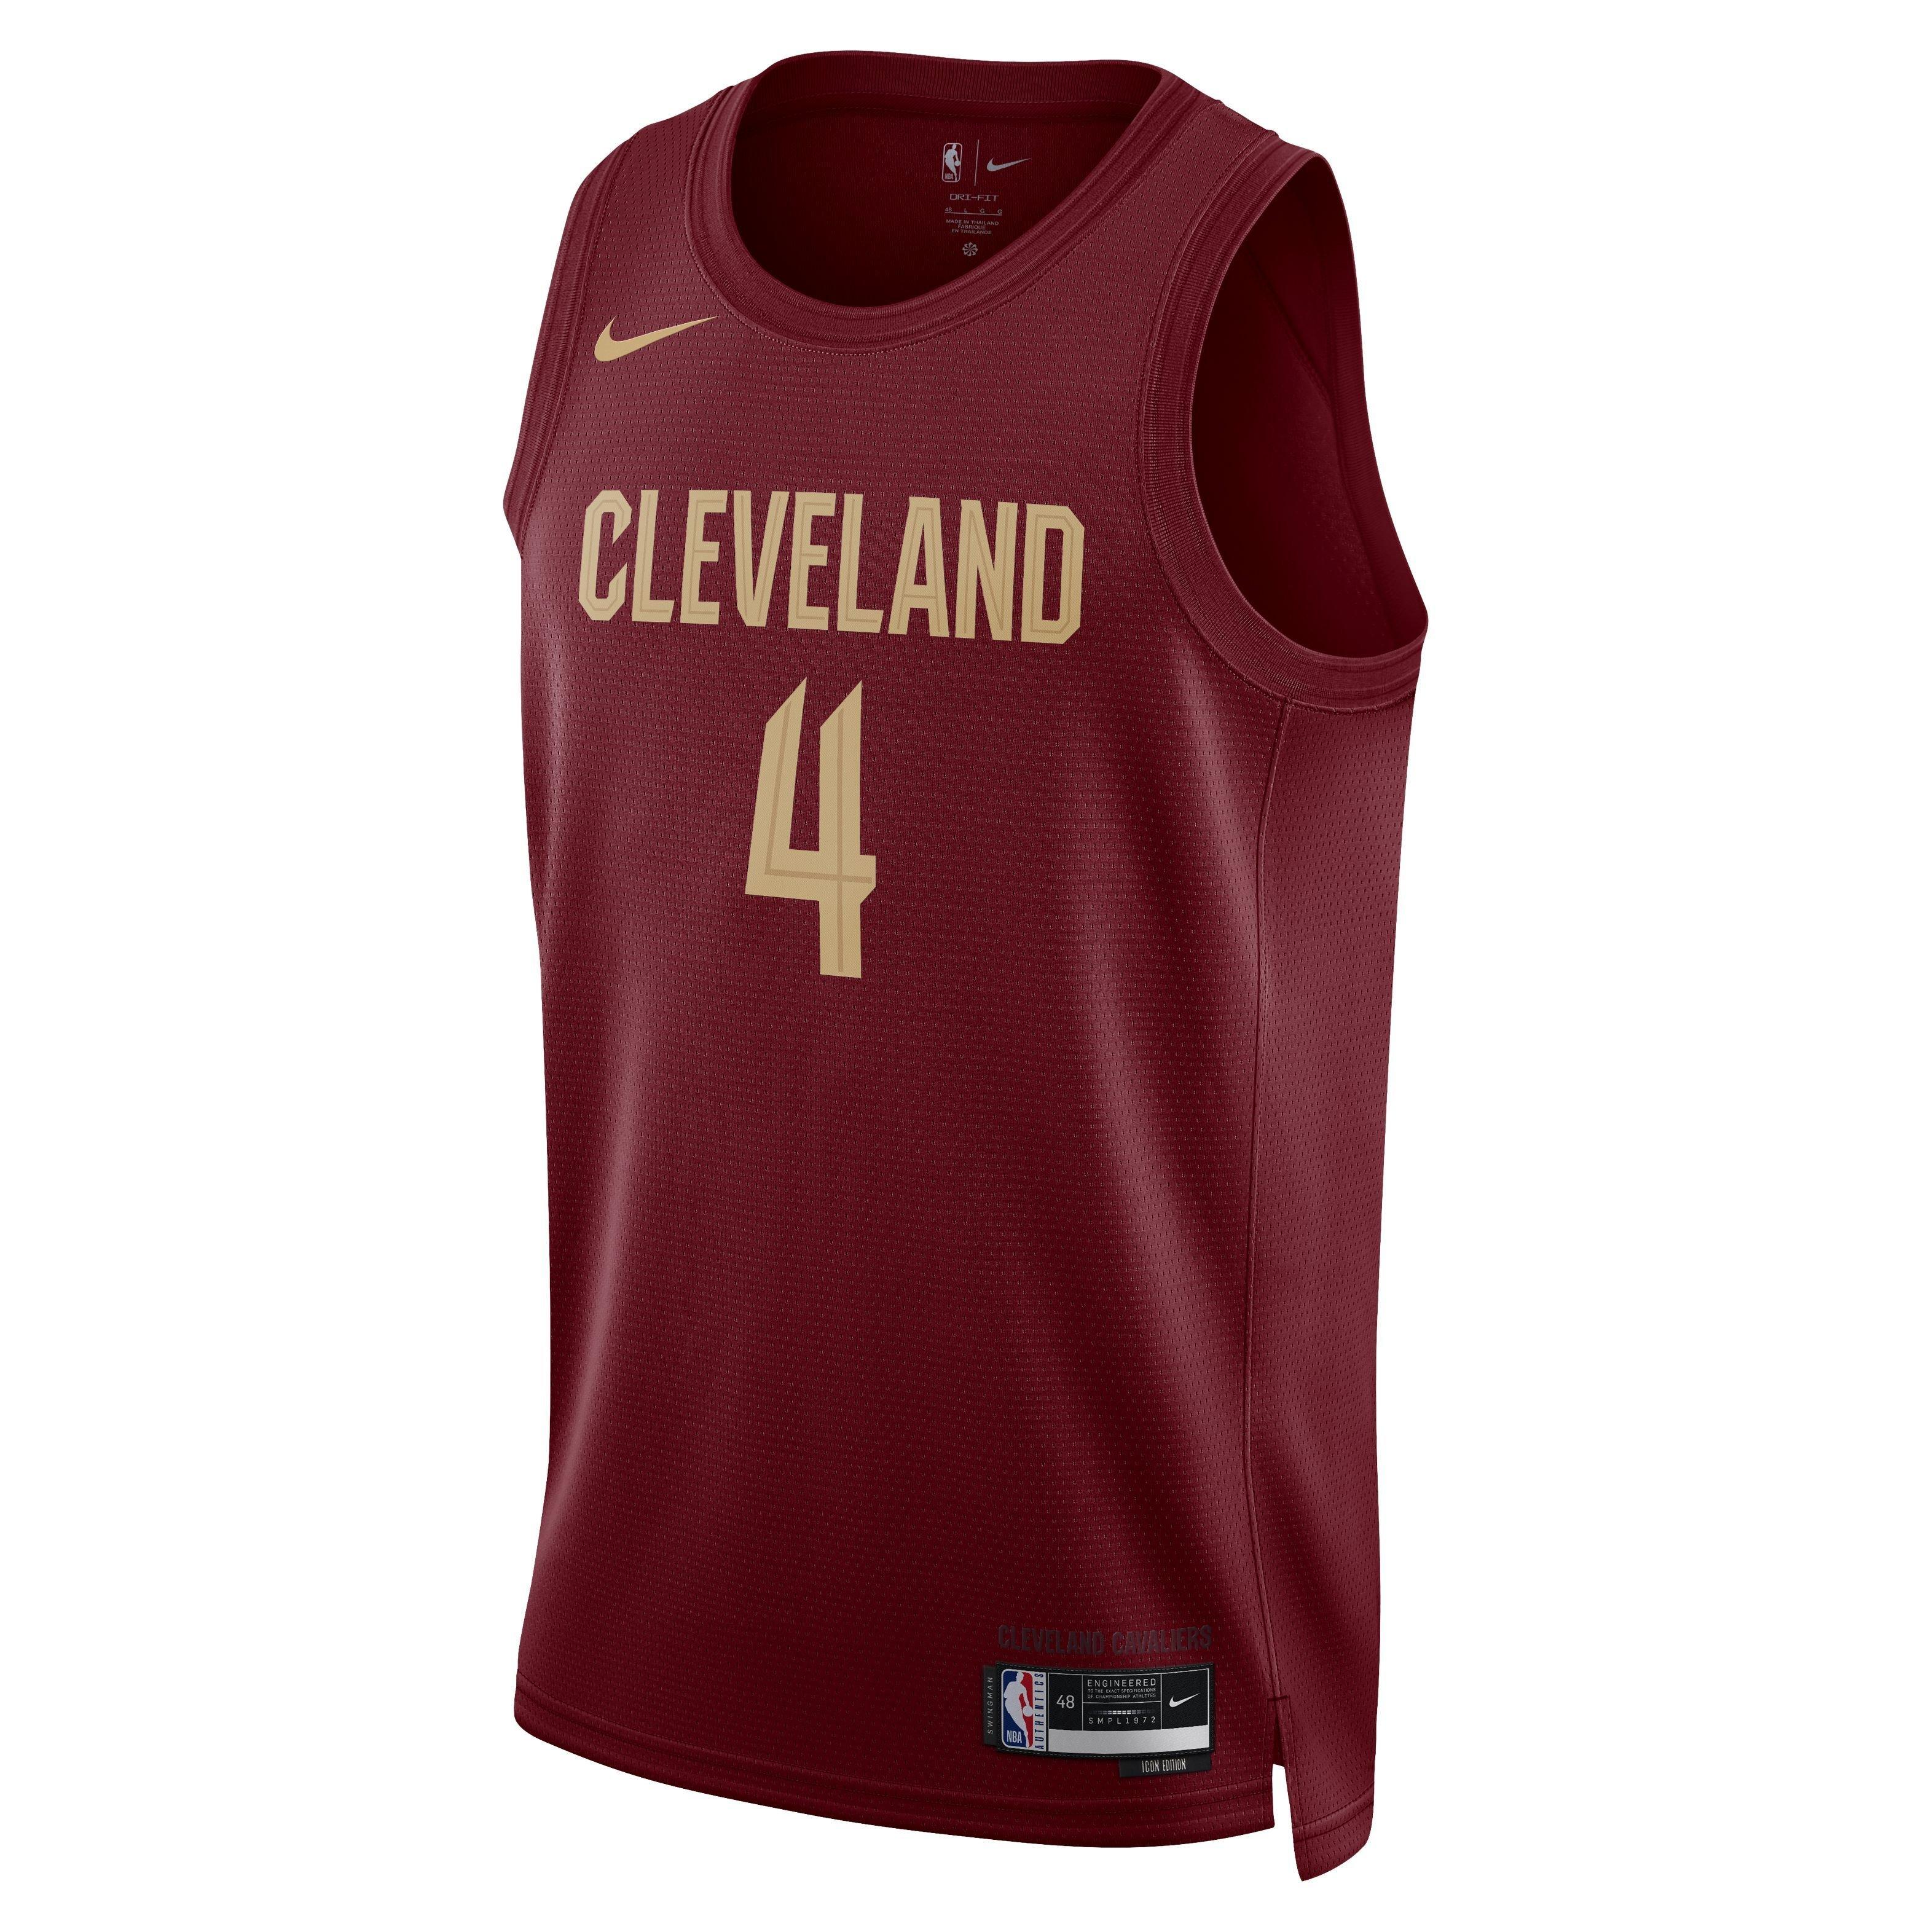 Sleeveless compression jersey Nike NP Dri-Fit - Compression garments -  Protections - Equipment